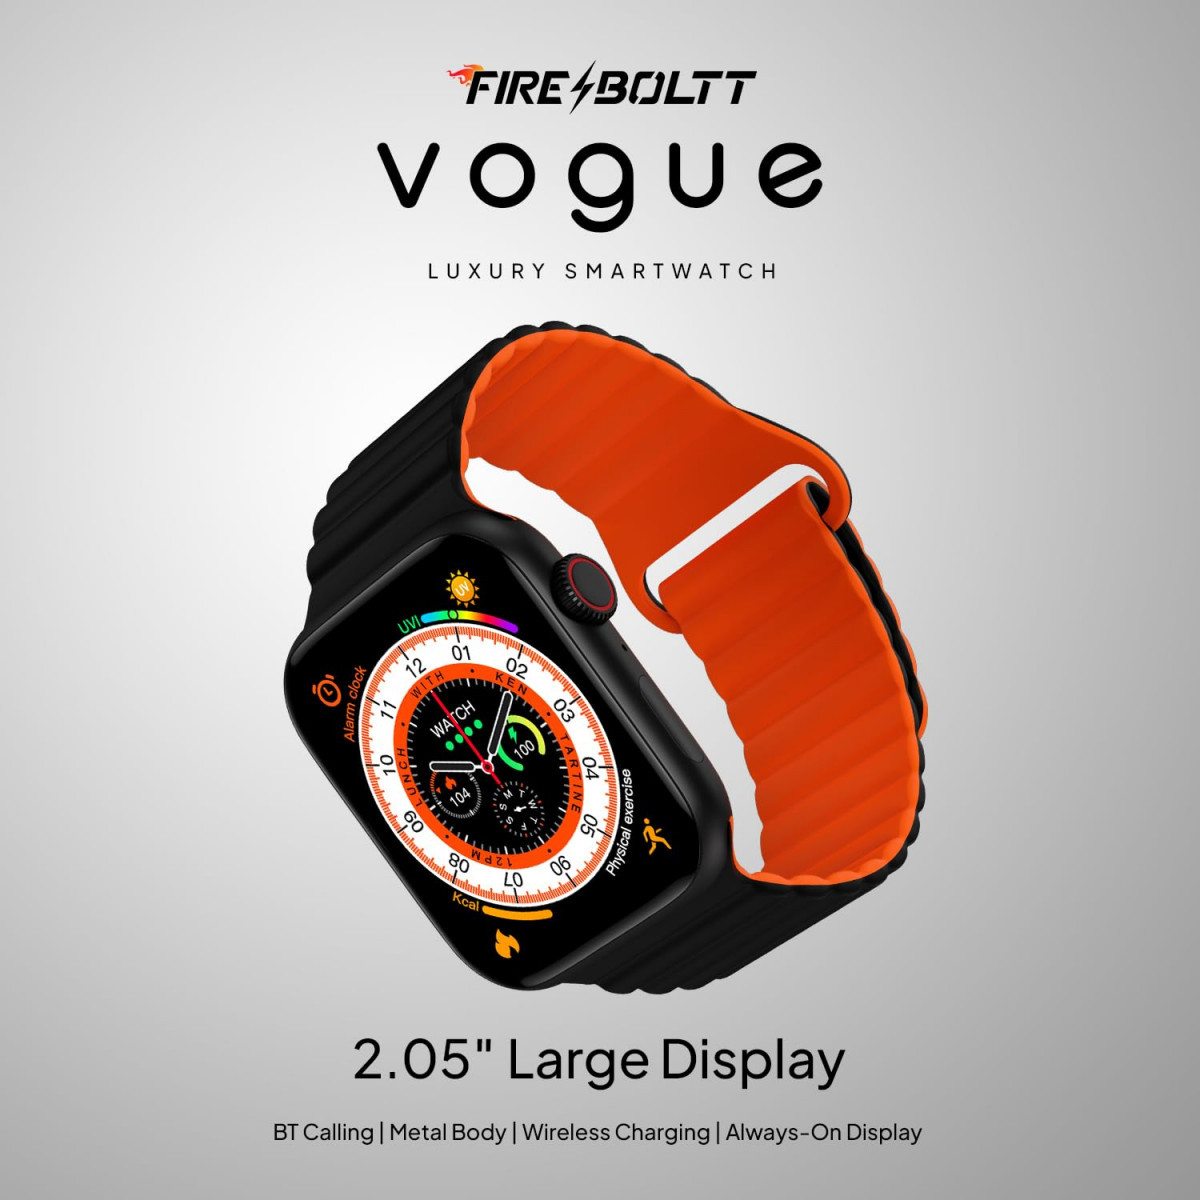 Fire-Boltt Newly Launched Vogue Large 205 Display Smart Watch Always On Display Wireless Charging App Based GPS with Bluetooth Calling  500 Watch Faces Charcoal Black